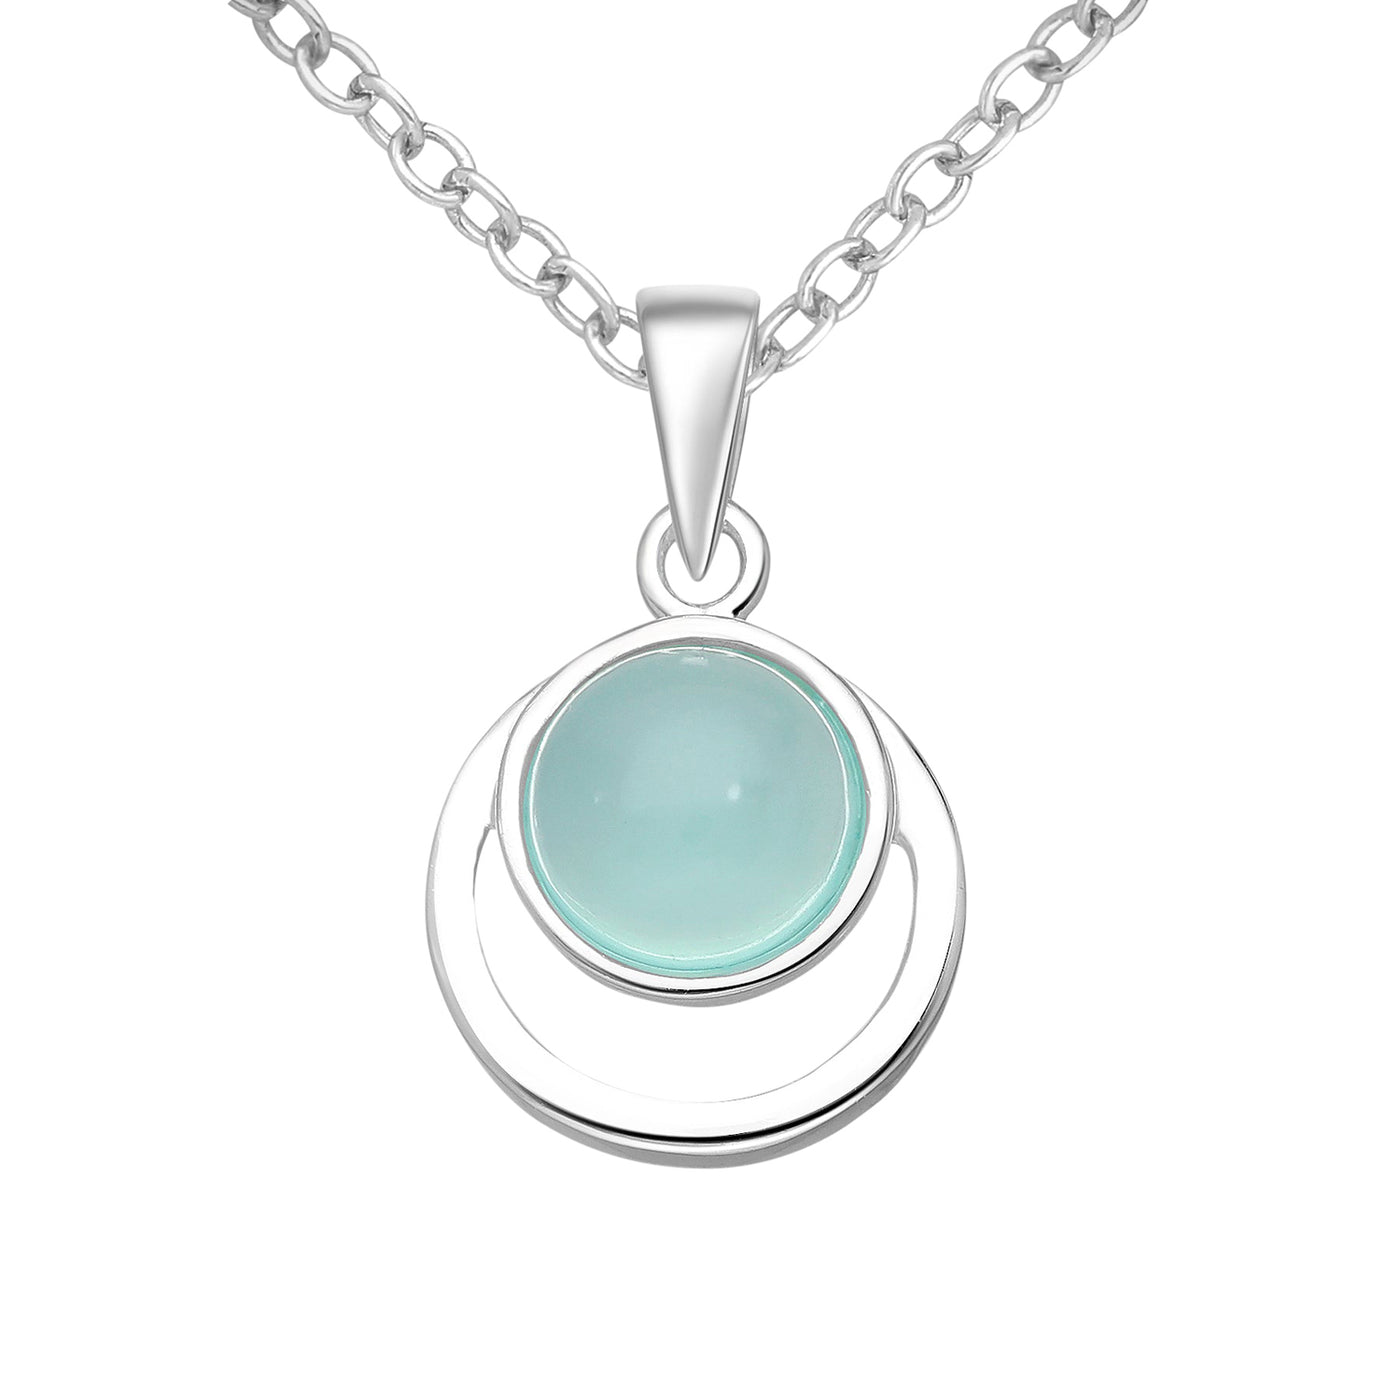 Blue Chalcedony Silver Necklace